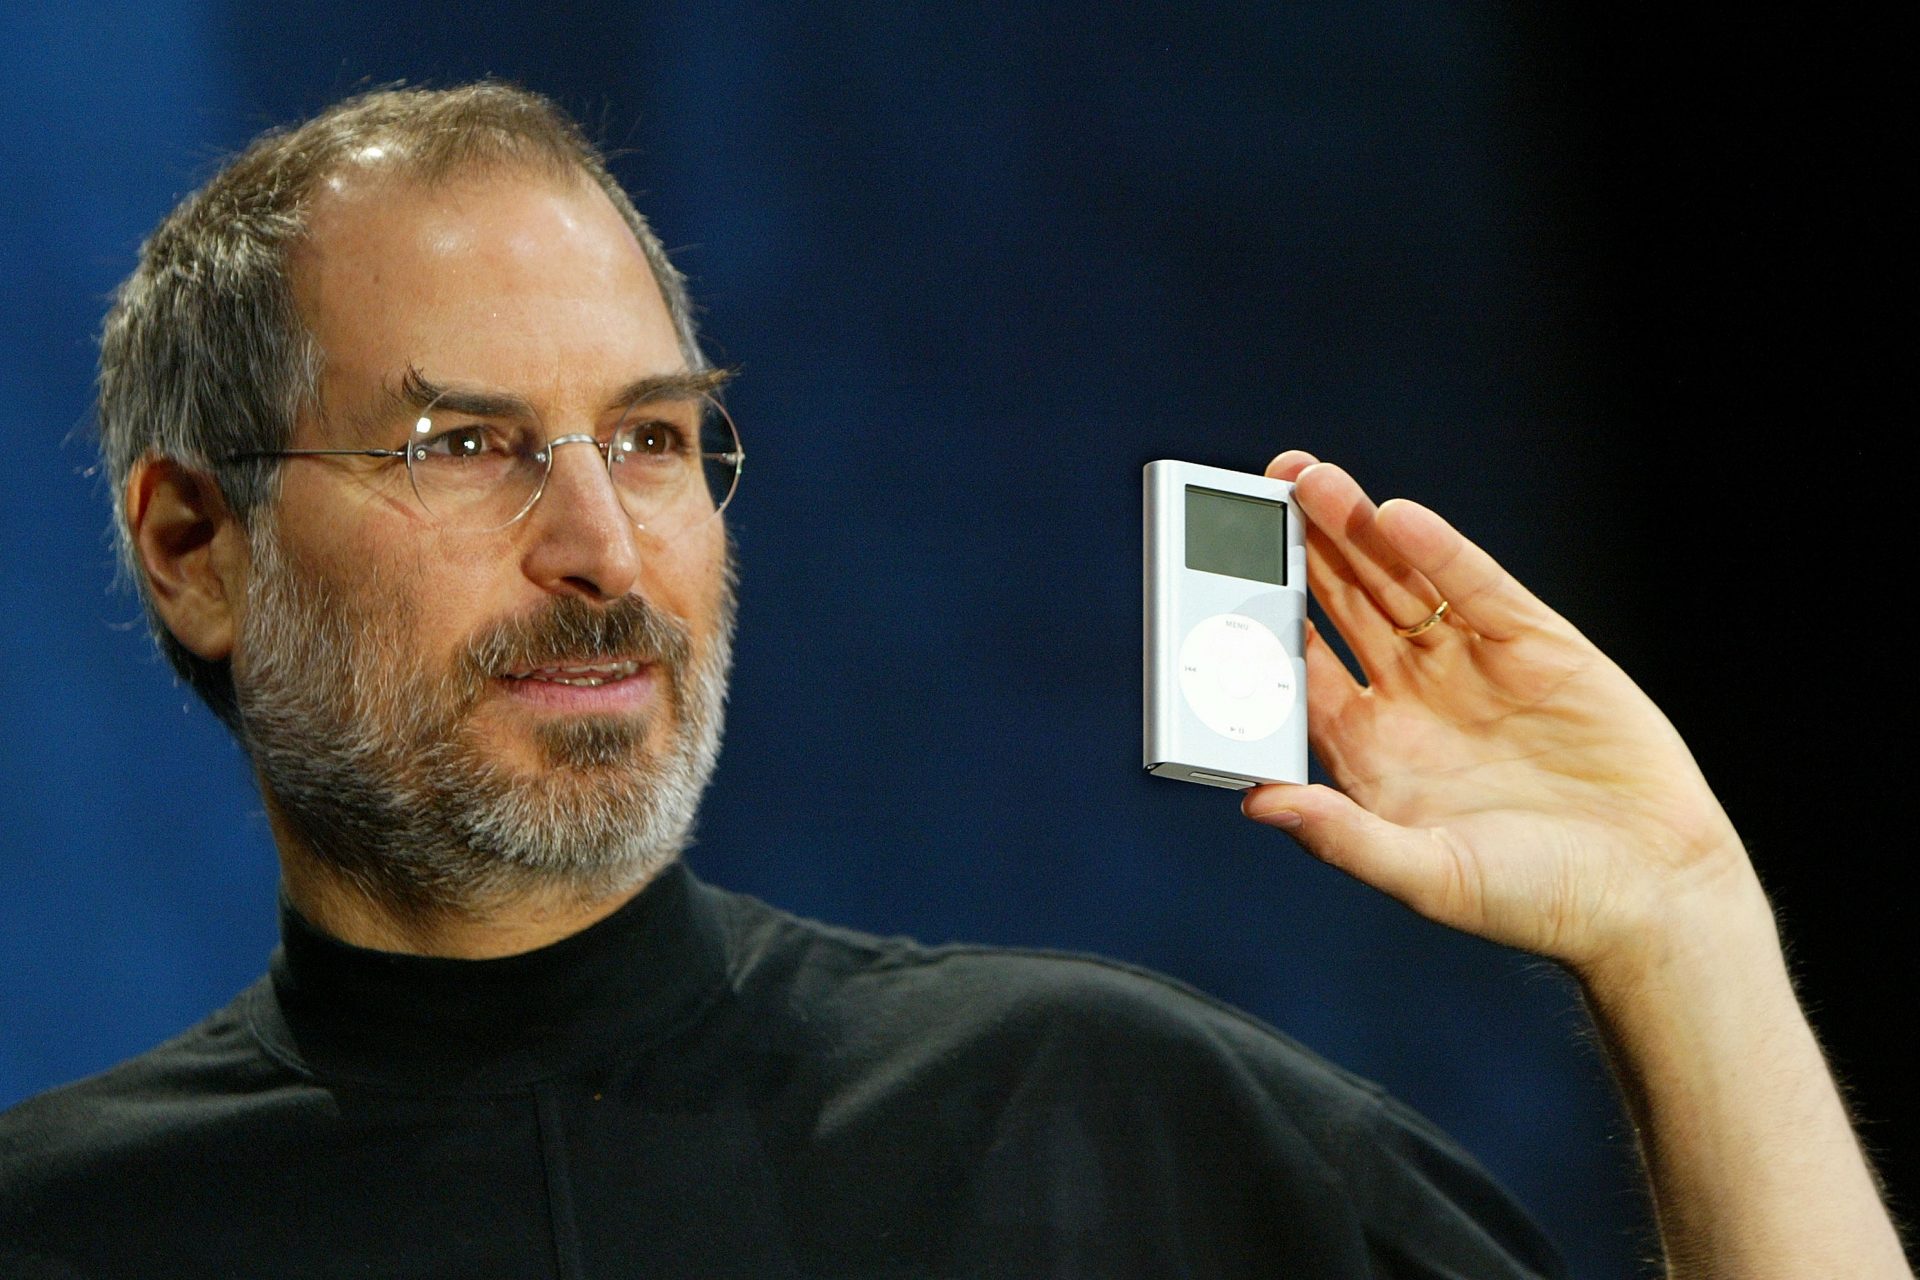 <p>On October 5, 2011, Steve Jobs took his last breath after battling pancreatic cancer. His sister, author Mona Simpson, subsequently signed a eulogy published in the New York Times, in which she described the Apple boss's final moments: "Before embarking, he'd looked at his sister Patty, then for a long time at his children, then at his life's partner, Laurene, and then over their shoulders past them… Steve's last words were: 'Oh wow. Oh wow. Oh wow.'"</p>